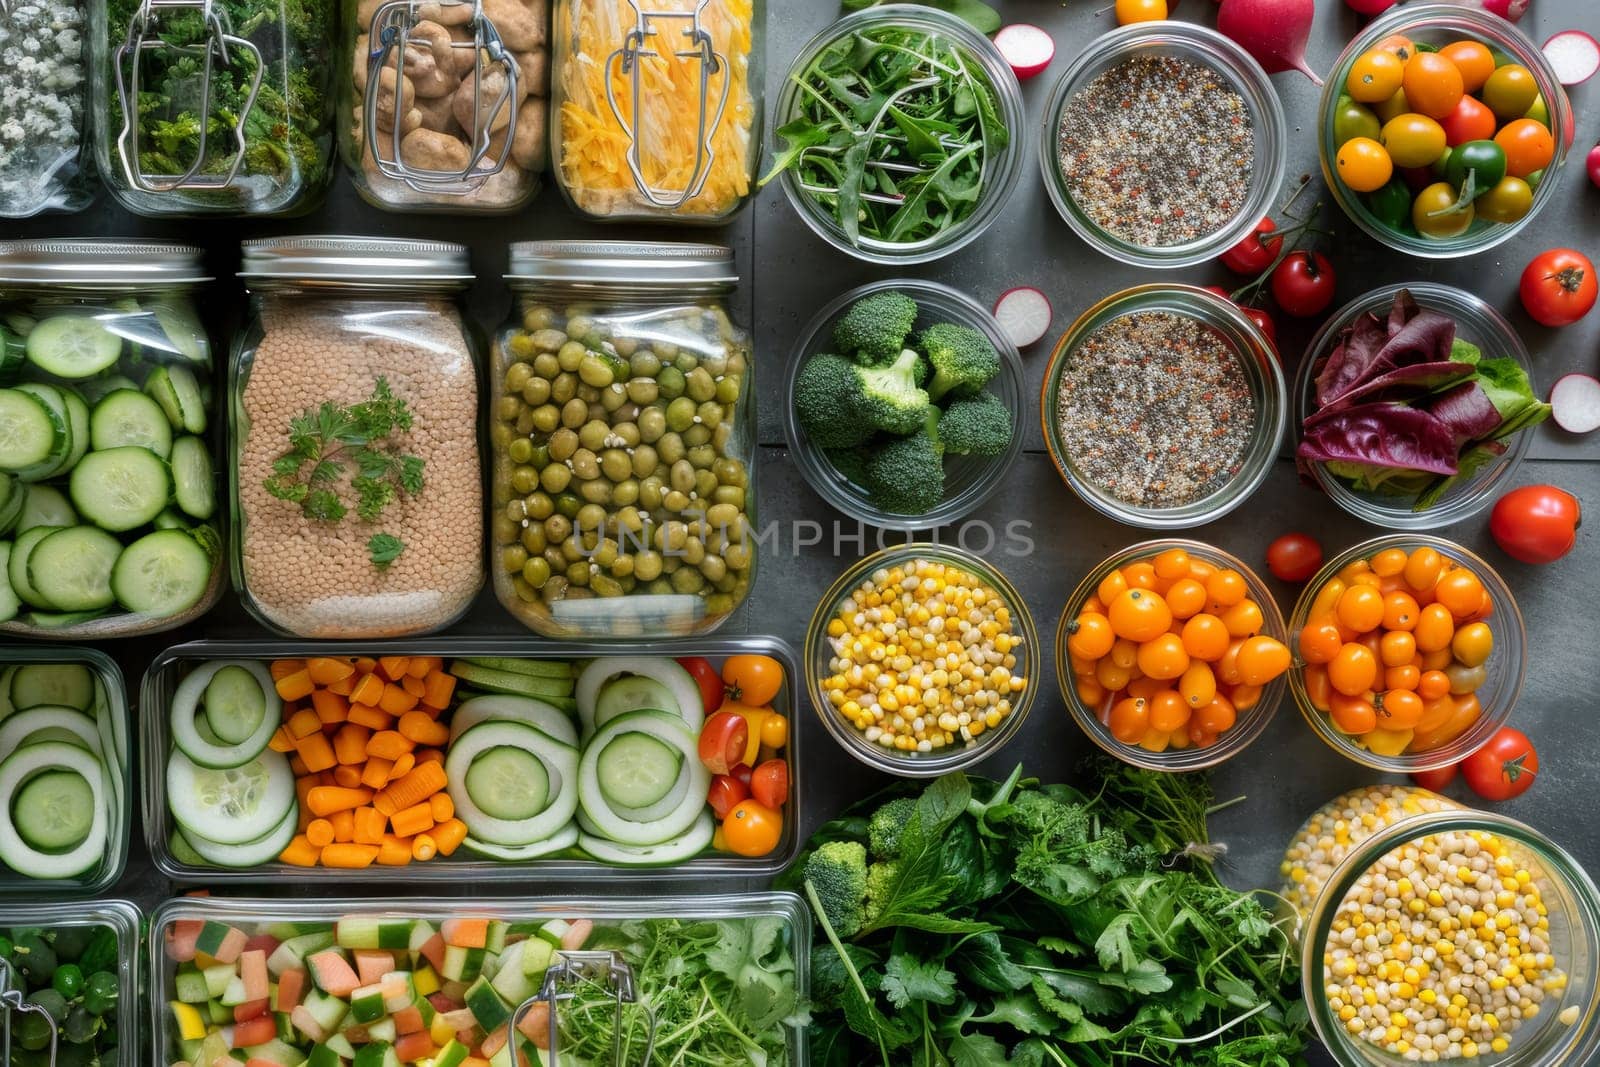 An organized display of plant-based foods neatly arranged in containers, showcasing a variety of colorful vegetables and grains for a healthy diet